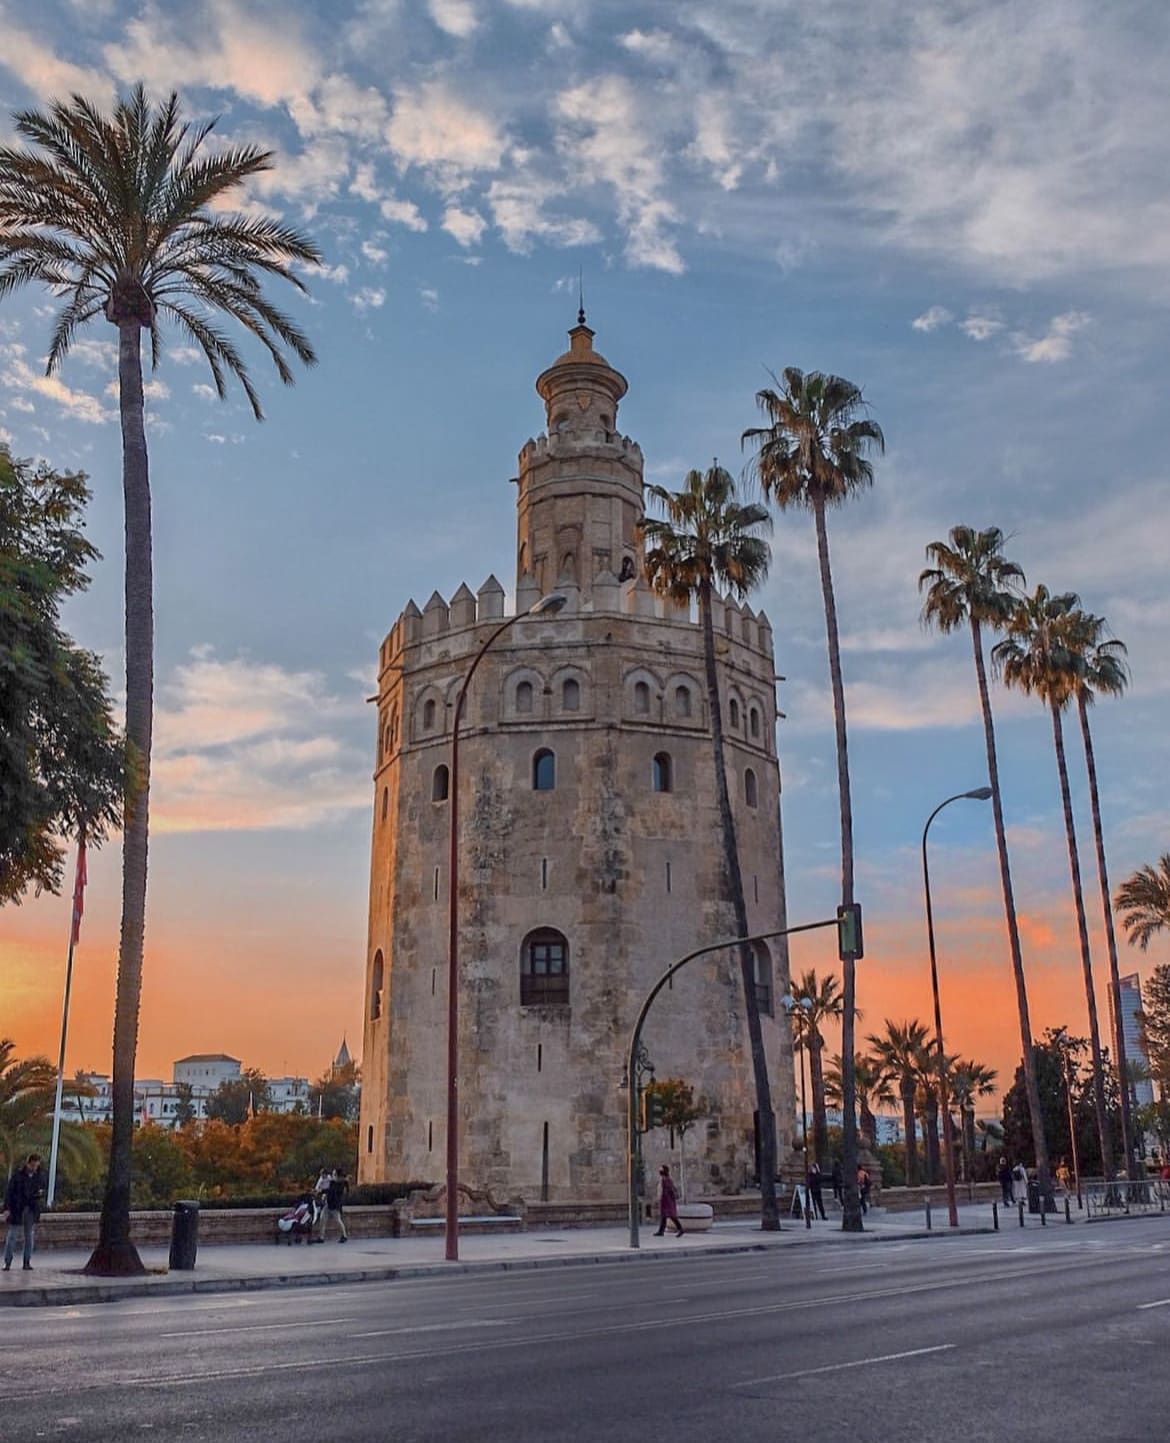 Sunset in Seville - Must-See Tourist Attractions in Spain